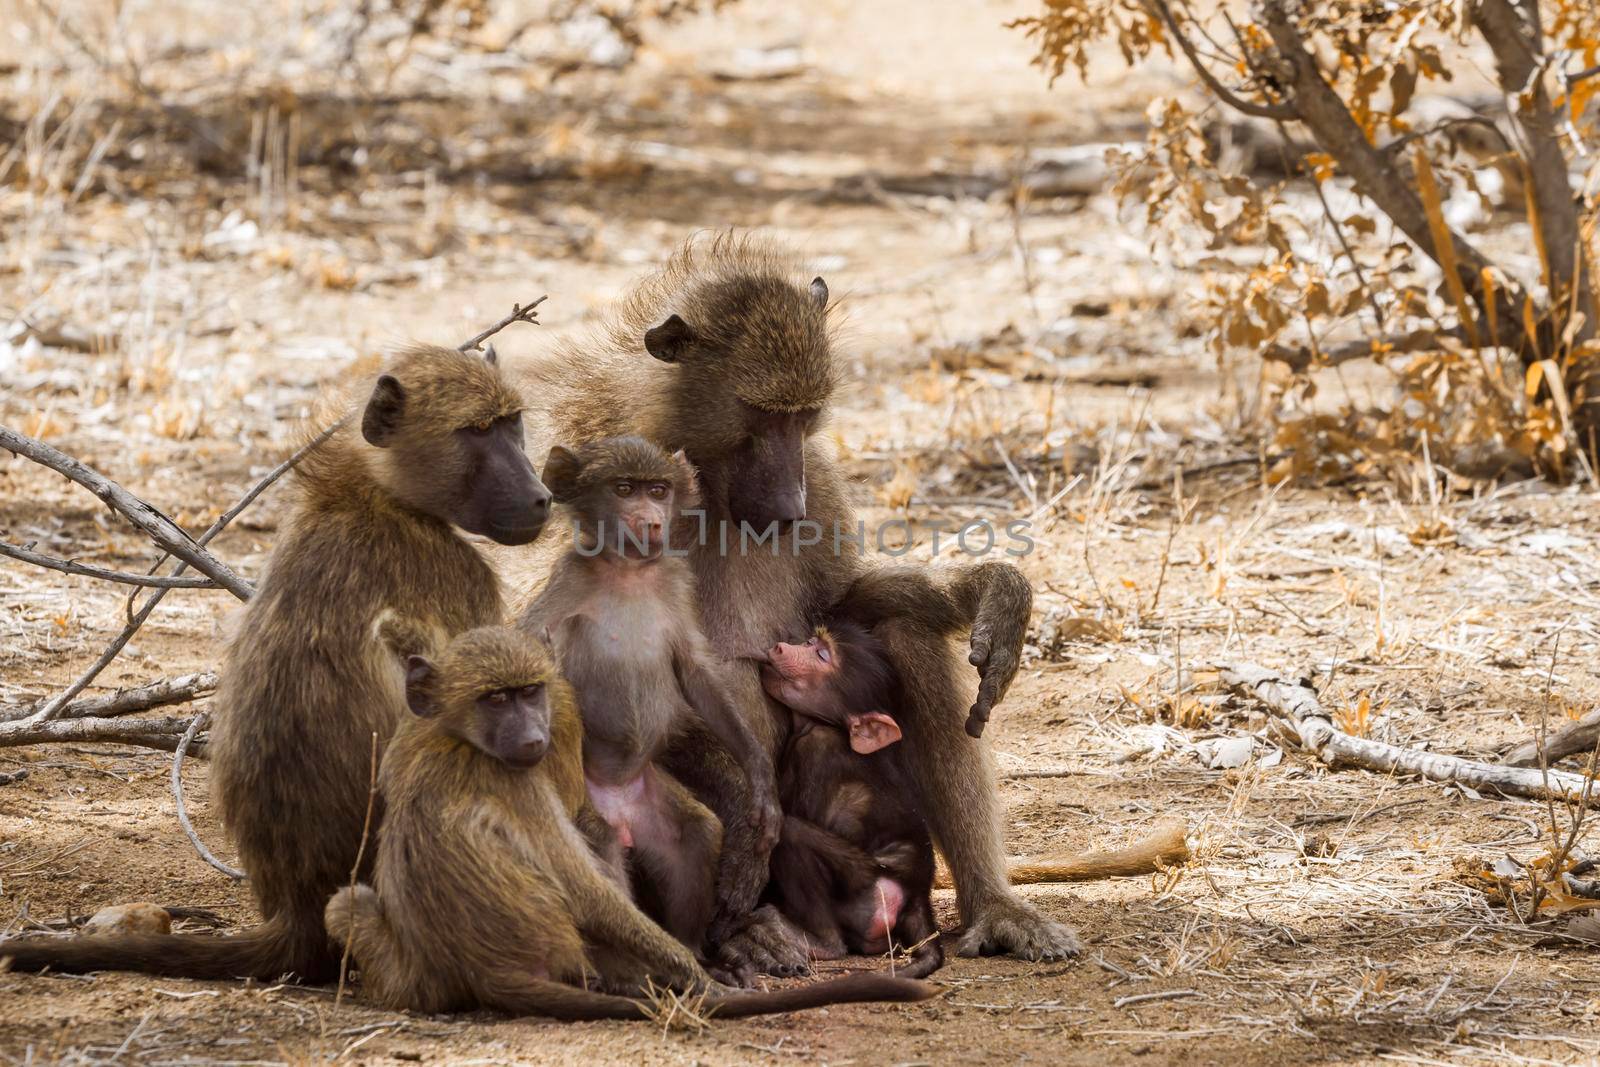 Chacma baboon family with babies in Kruger National park, South Africa ; Specie Papio ursinus family of Cercopithecidae